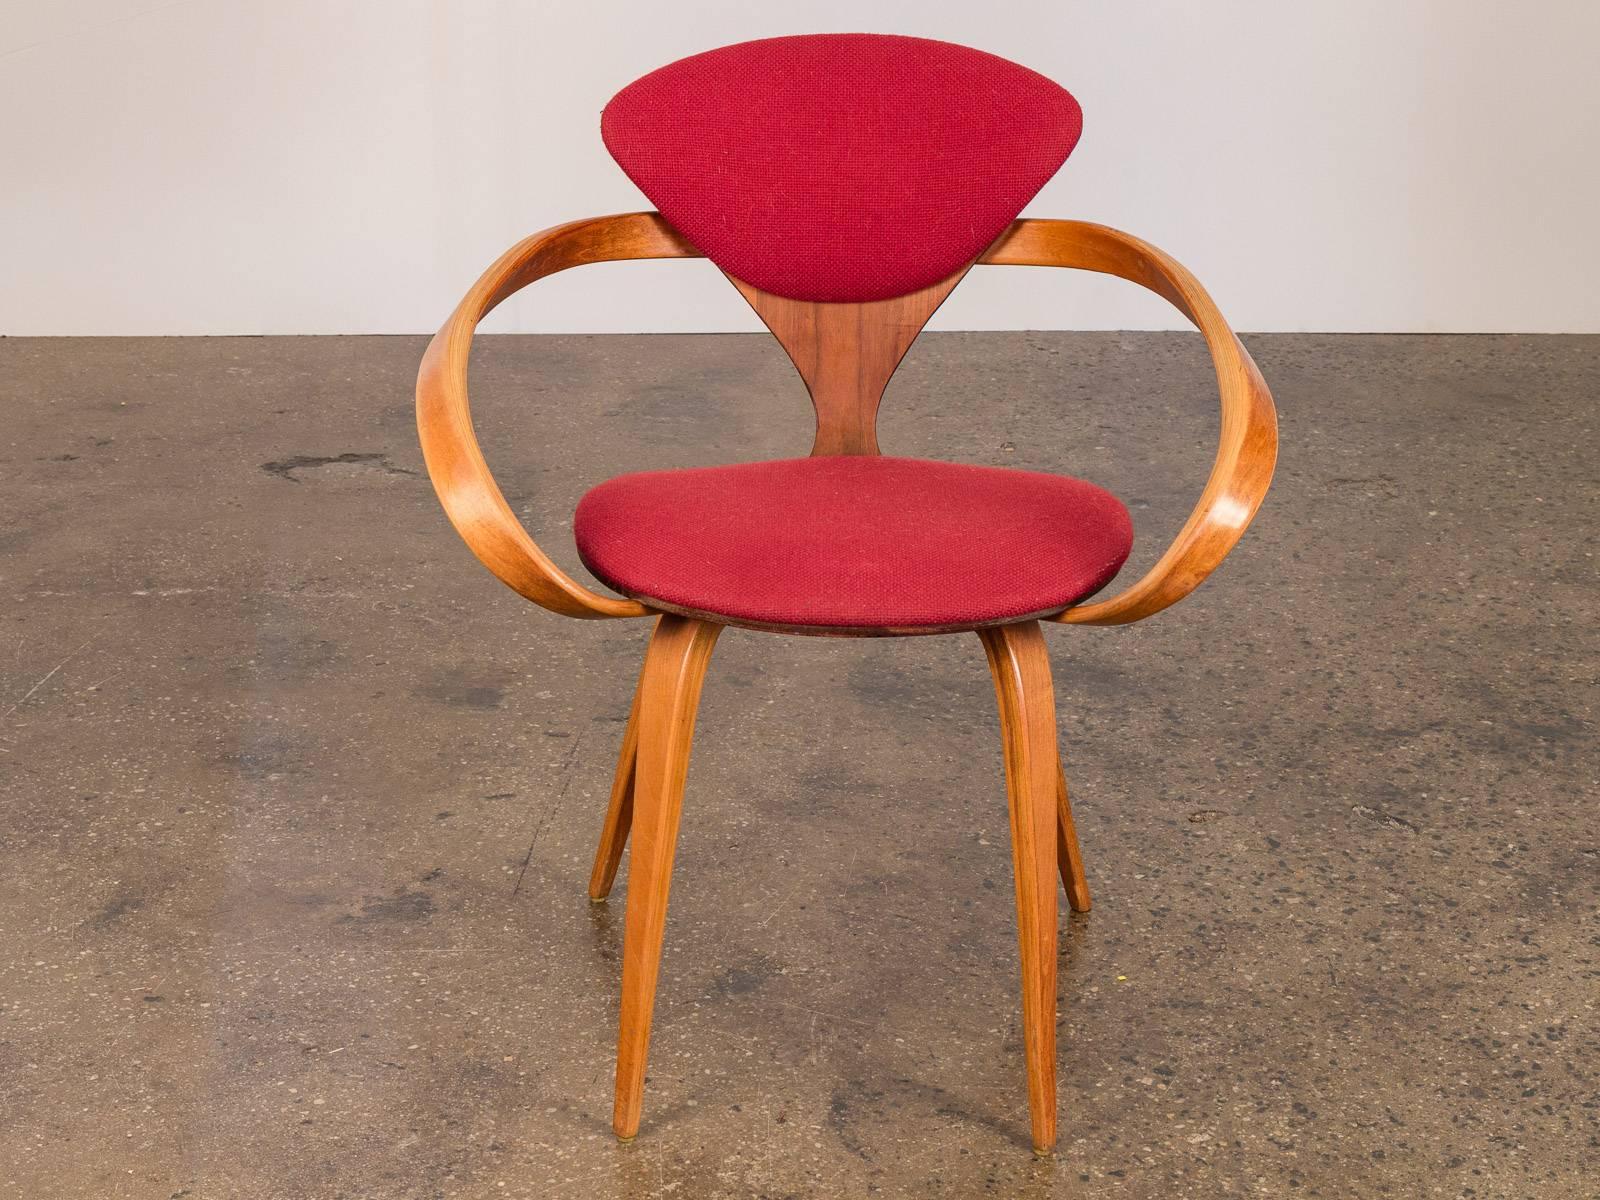 1960s Classic Pretzel chair by Norman Cherner for Plycraft with original wool blend material. Fabric is clean and bright; piece is in overall excellent vintage condition with age-appropriate wear.

